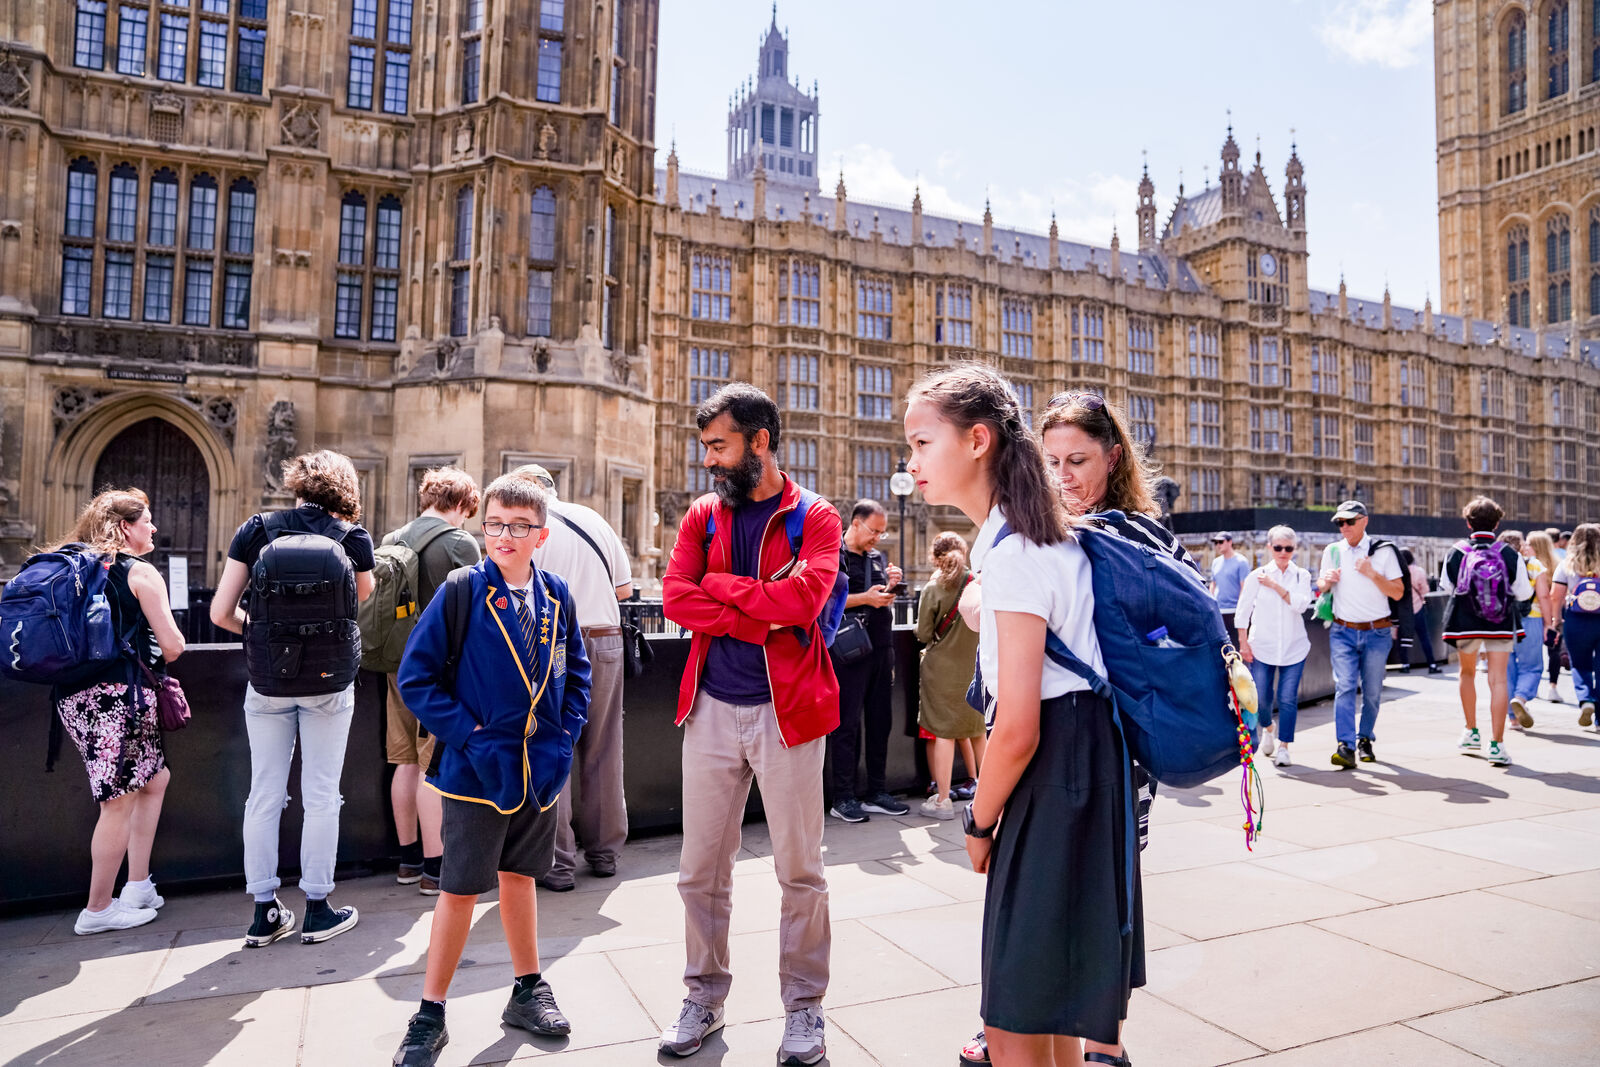 Pupil Voice Week 2023: Making Voices Count in Education